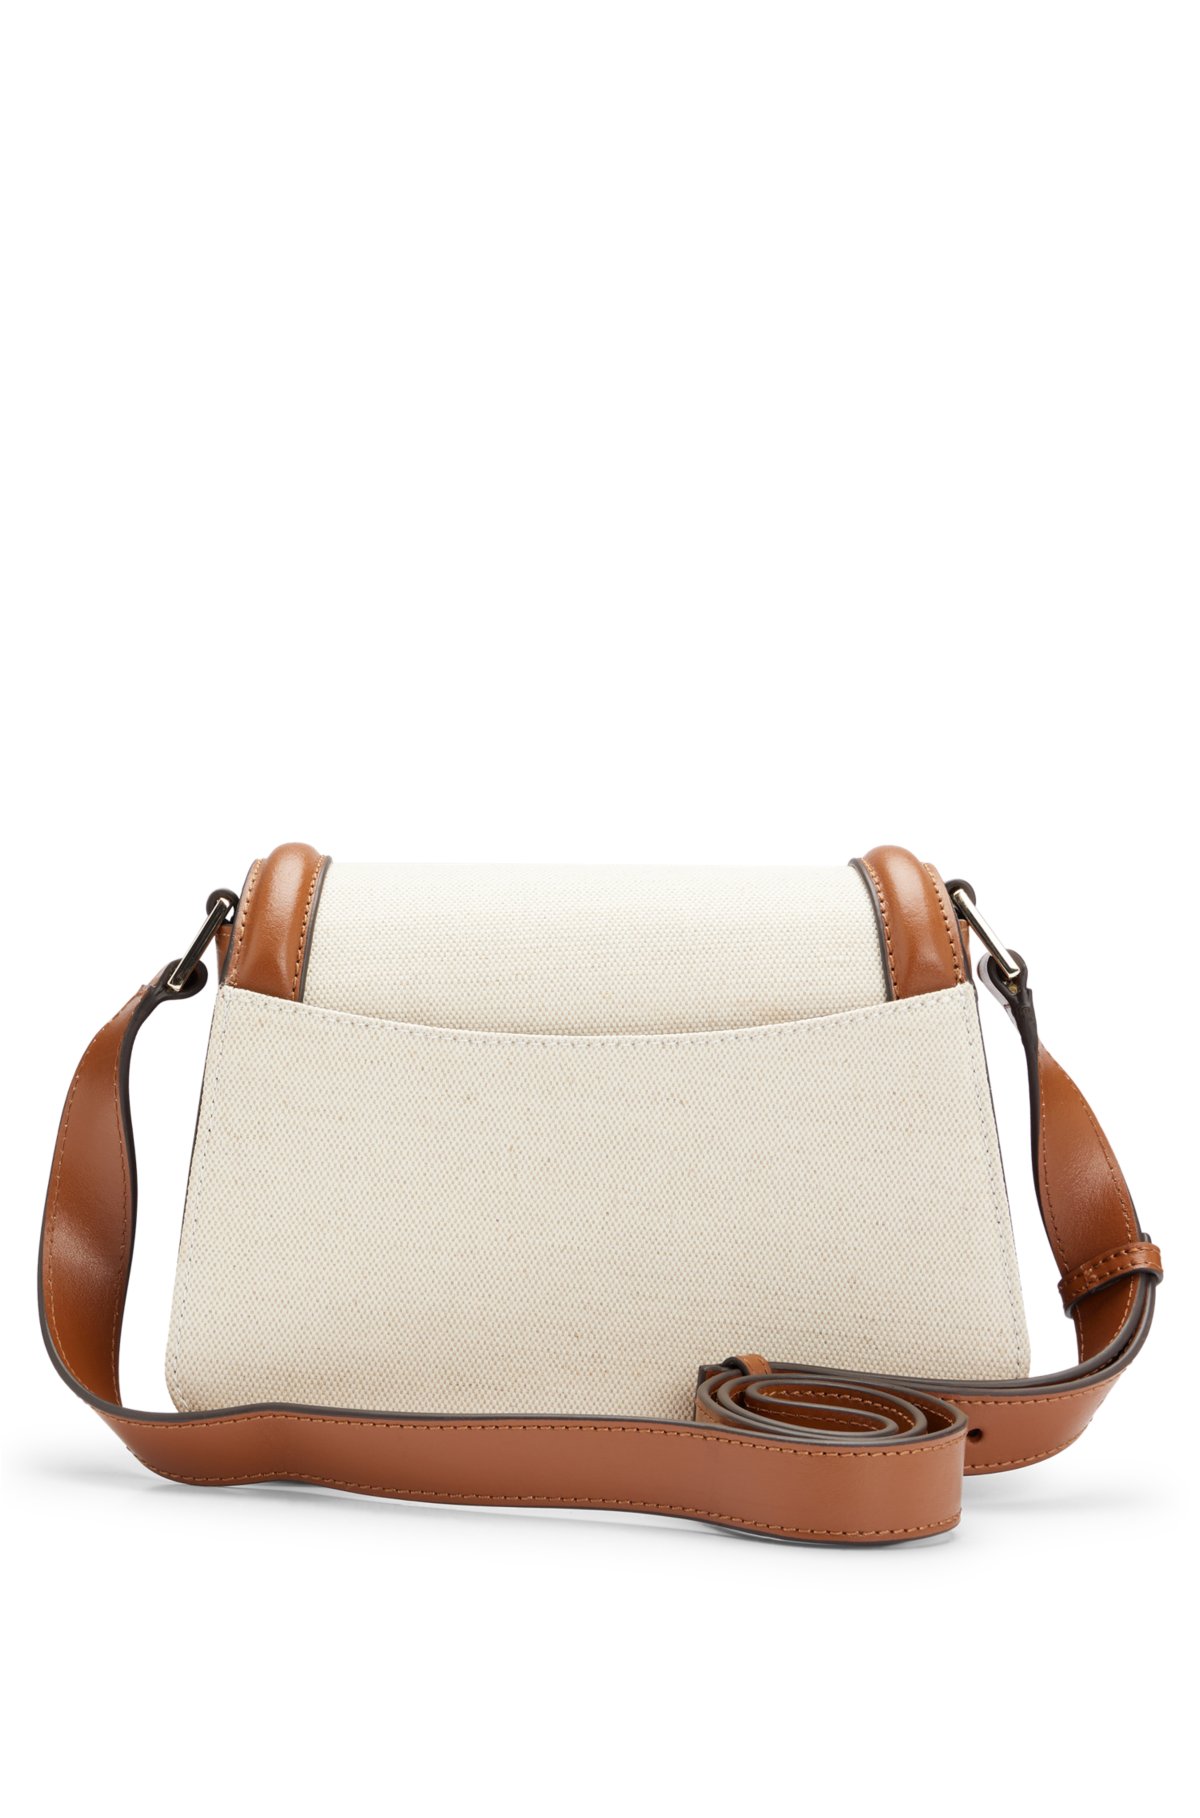 Cotton-blend saddle bag with leather trims, Beige